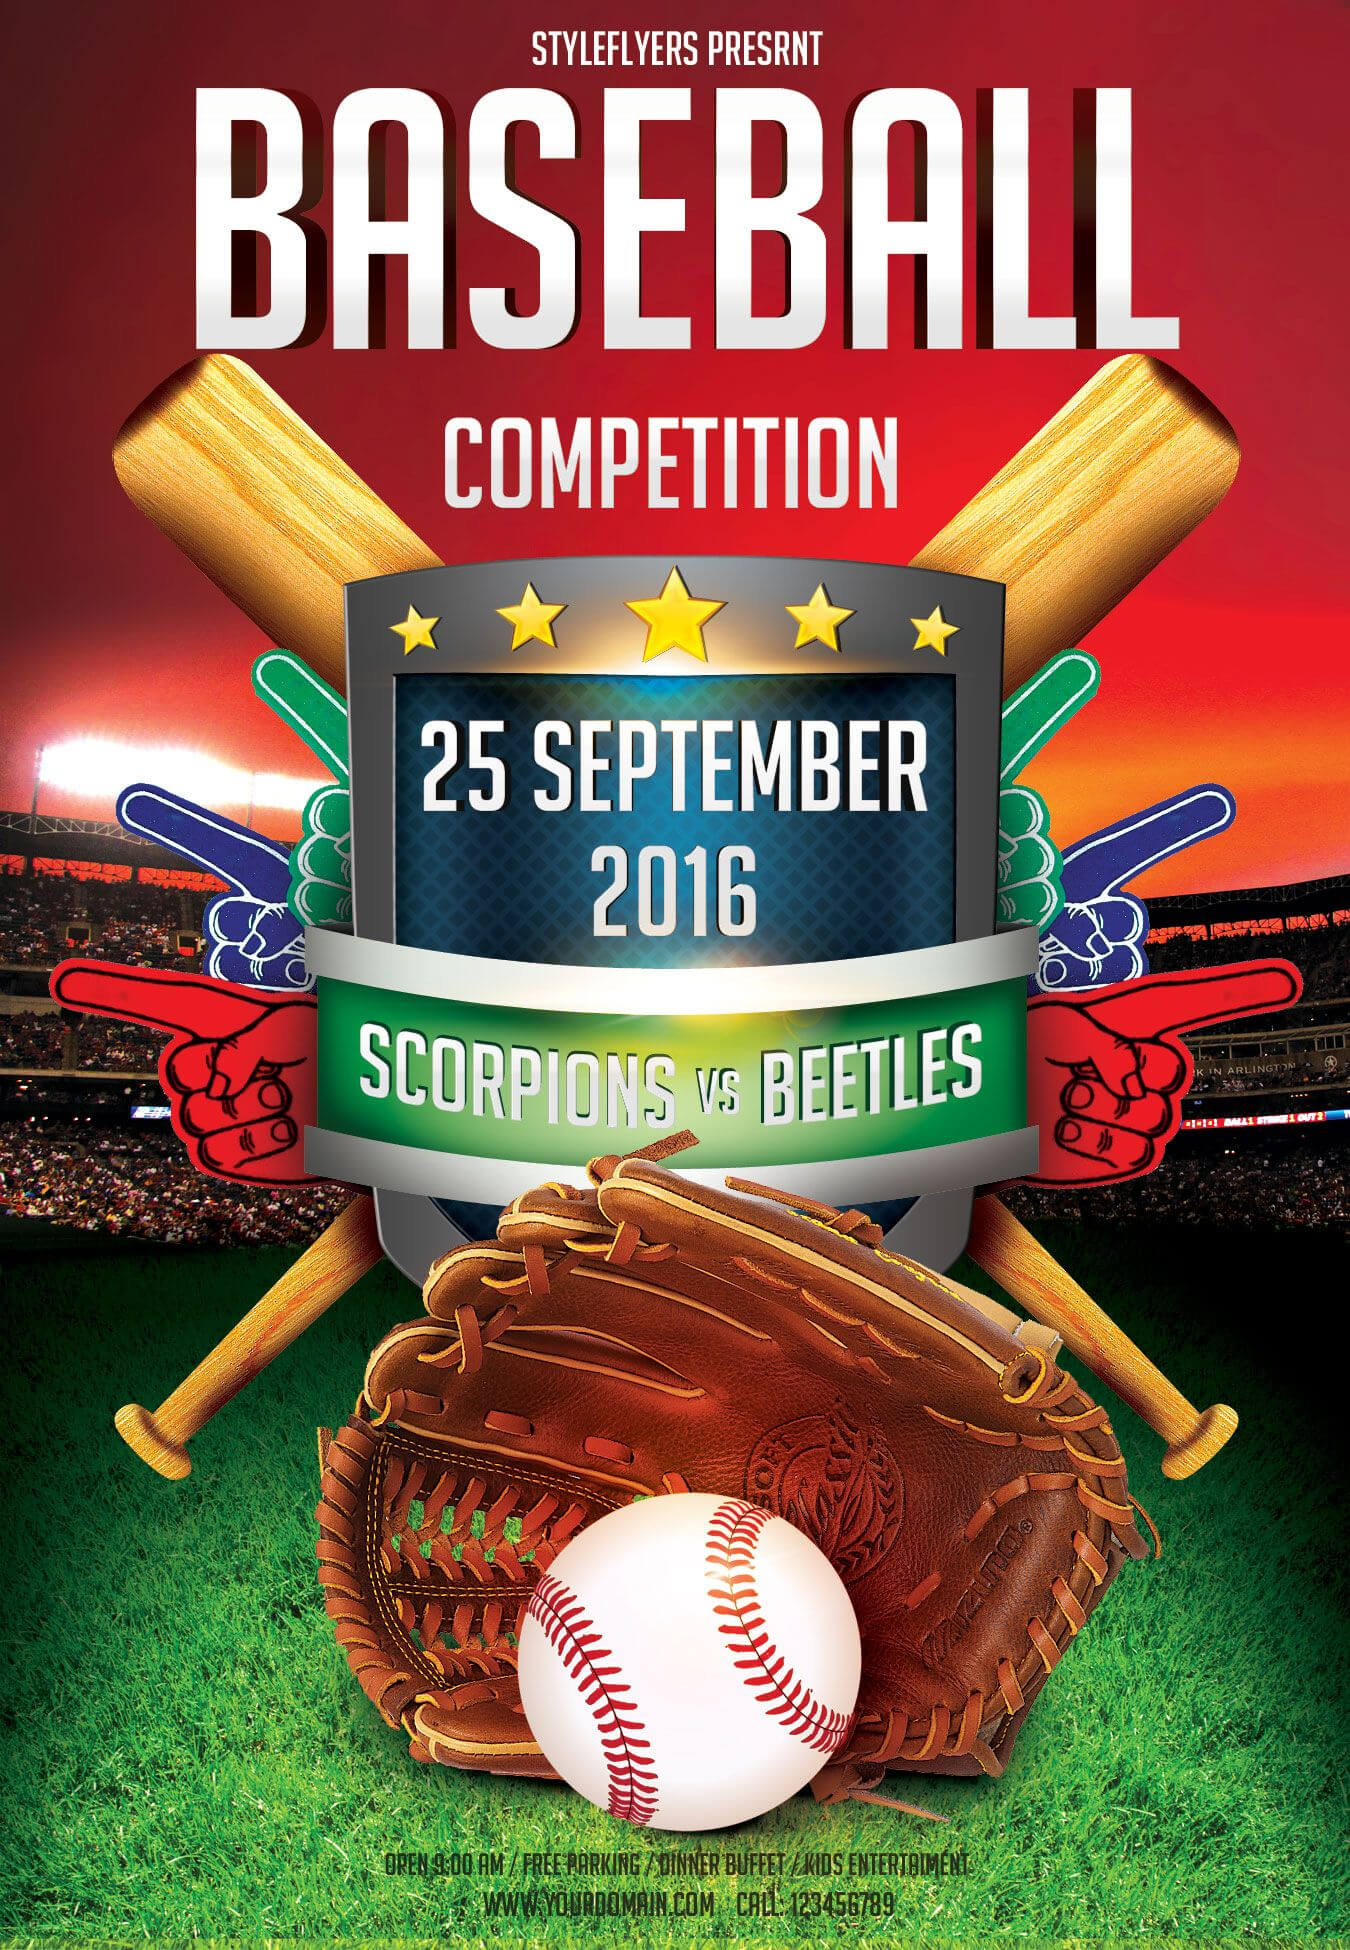 Baseball Competition Flyer Free Download #3326 | Flyer Free For Baseball Card Template Psd